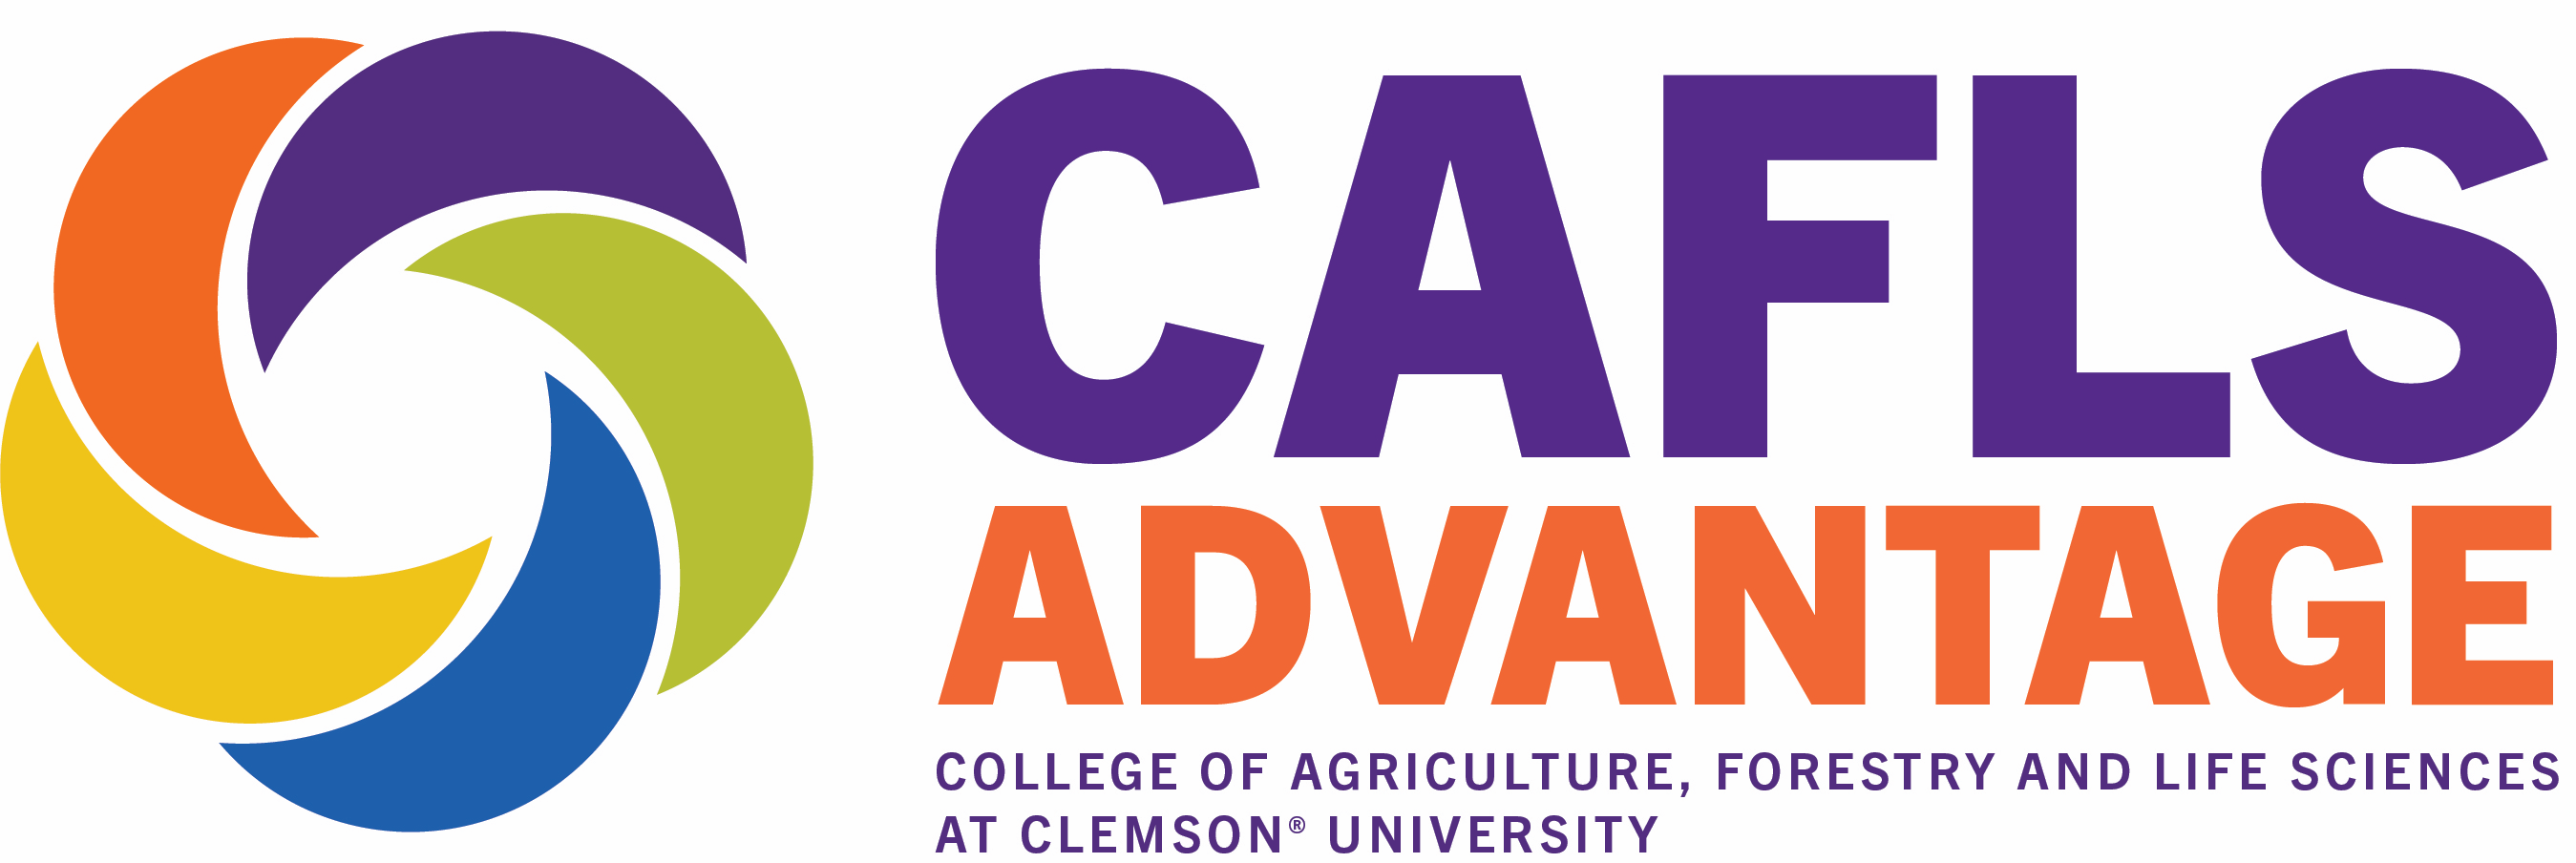 The CAFLS Advantage logo with tag line: experiential learning beyond the classroom